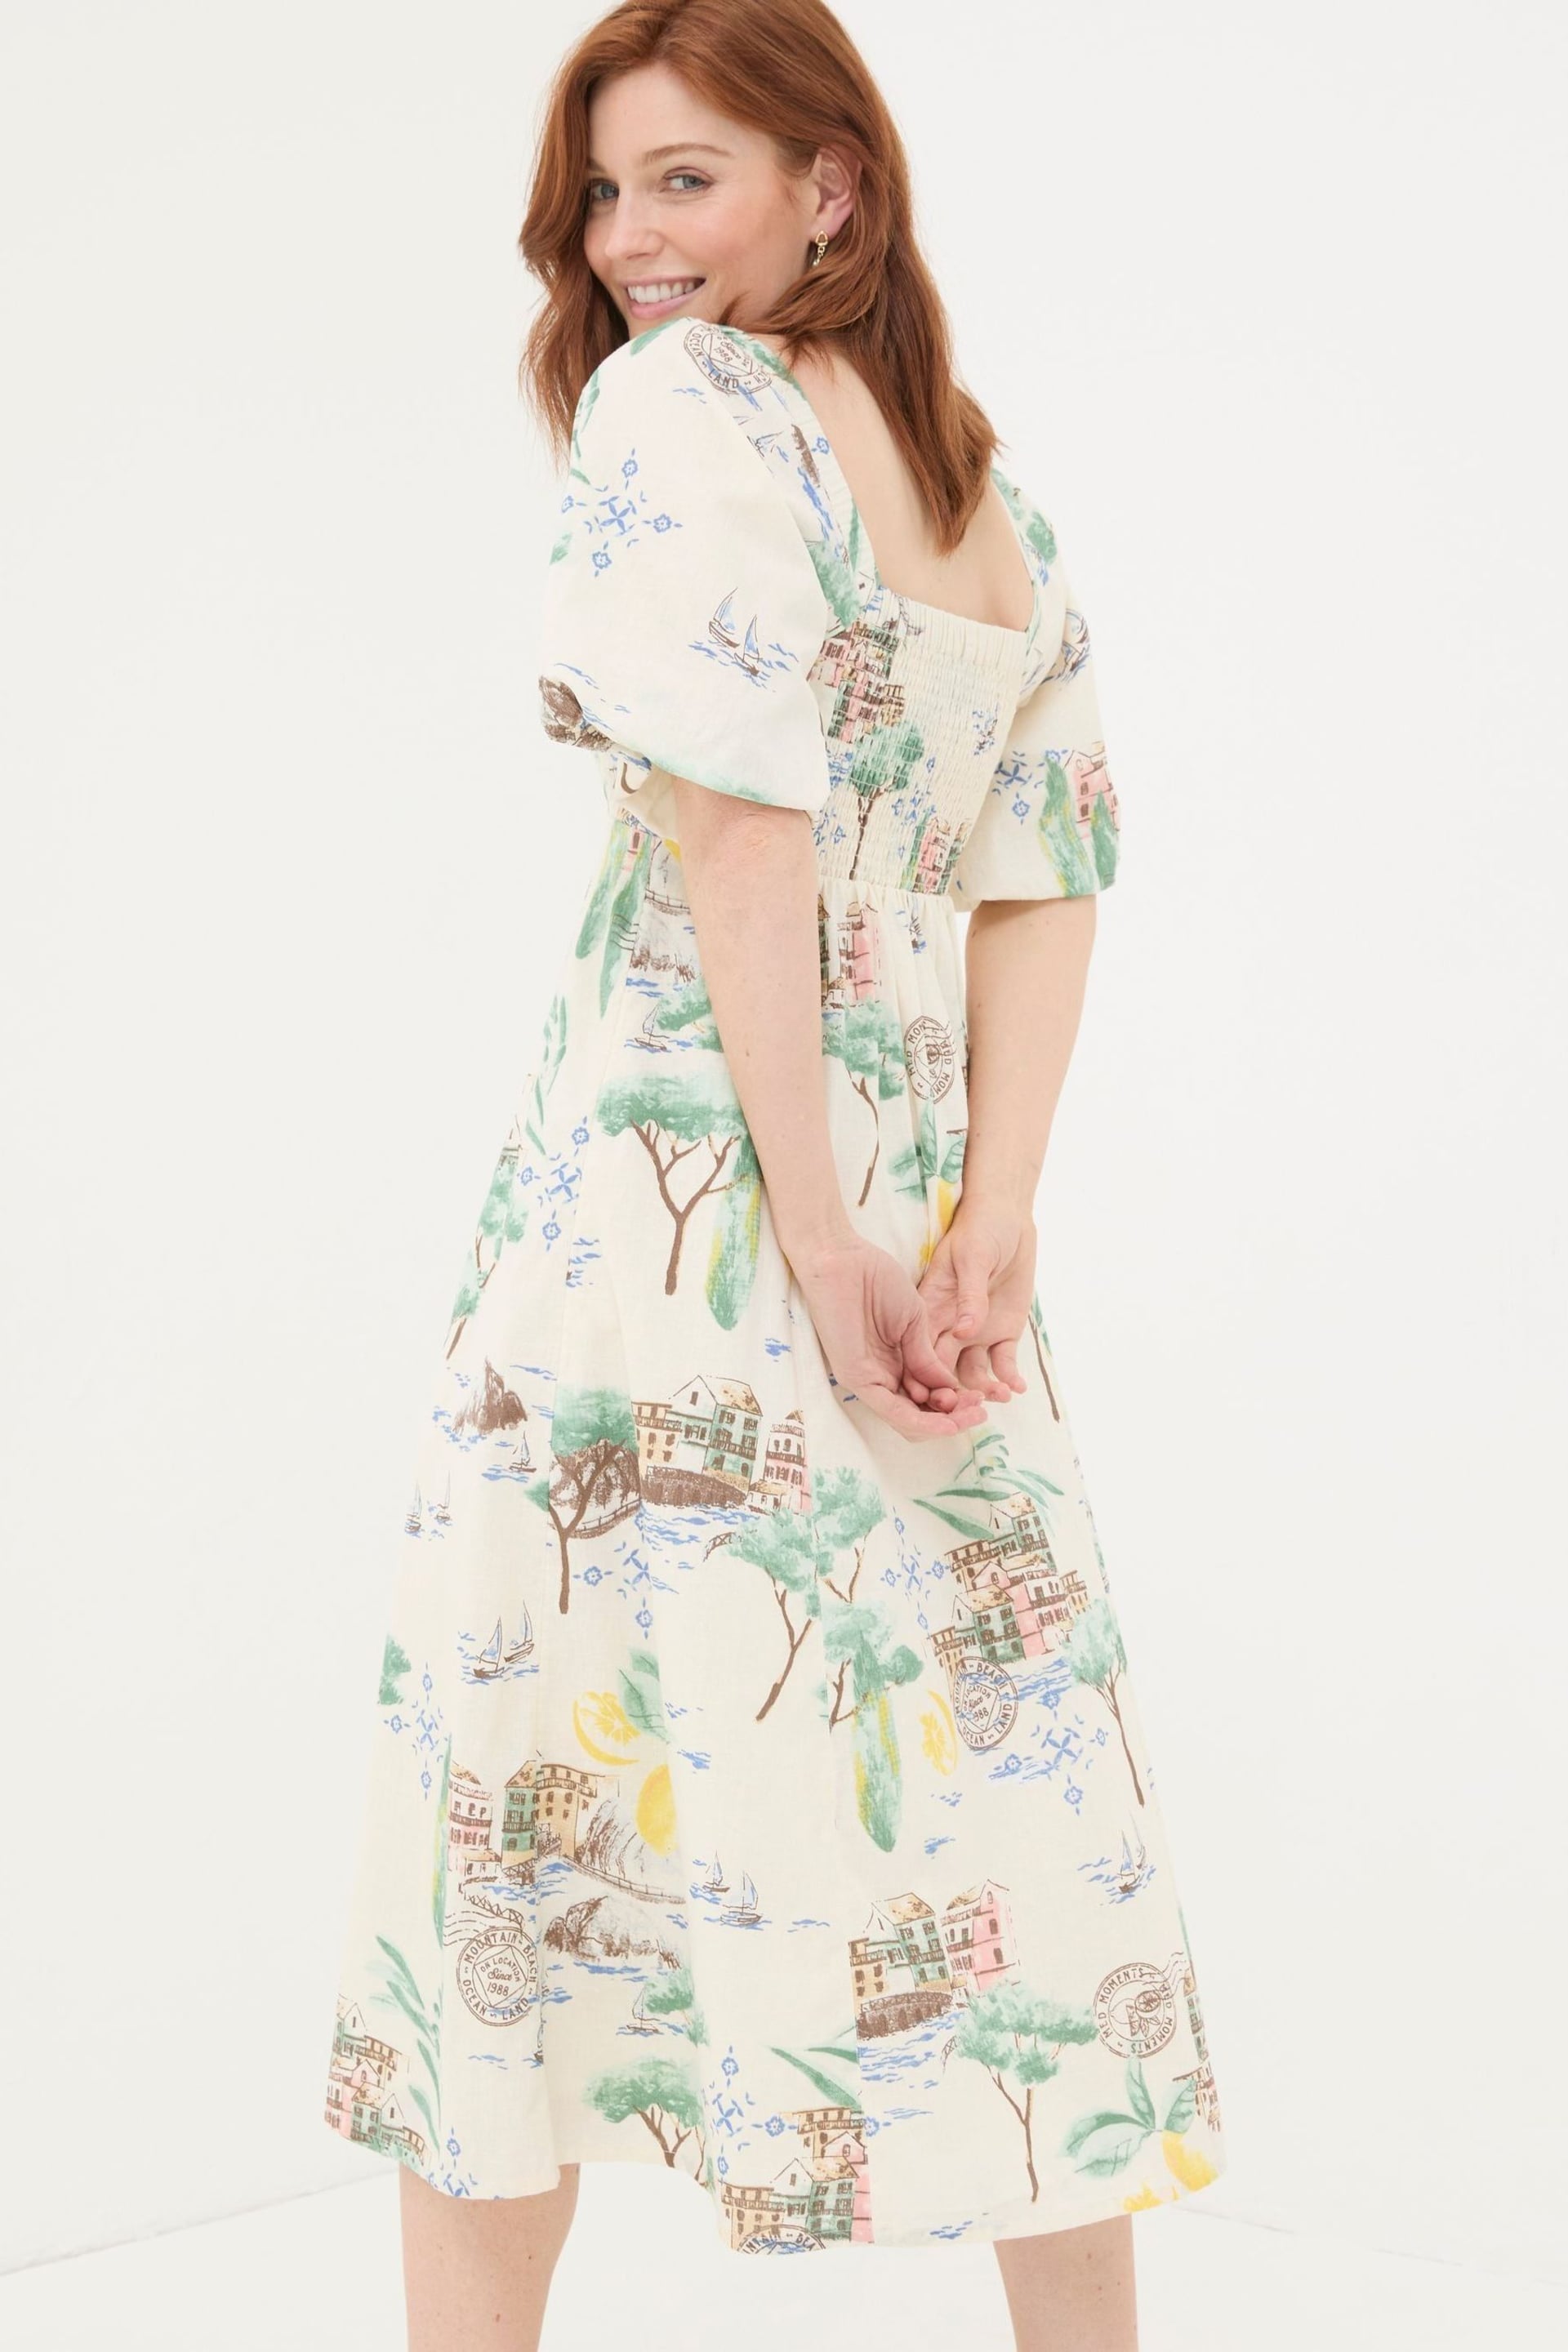 FatFace Natural Lucie Postcard Midi Dress - Image 2 of 7